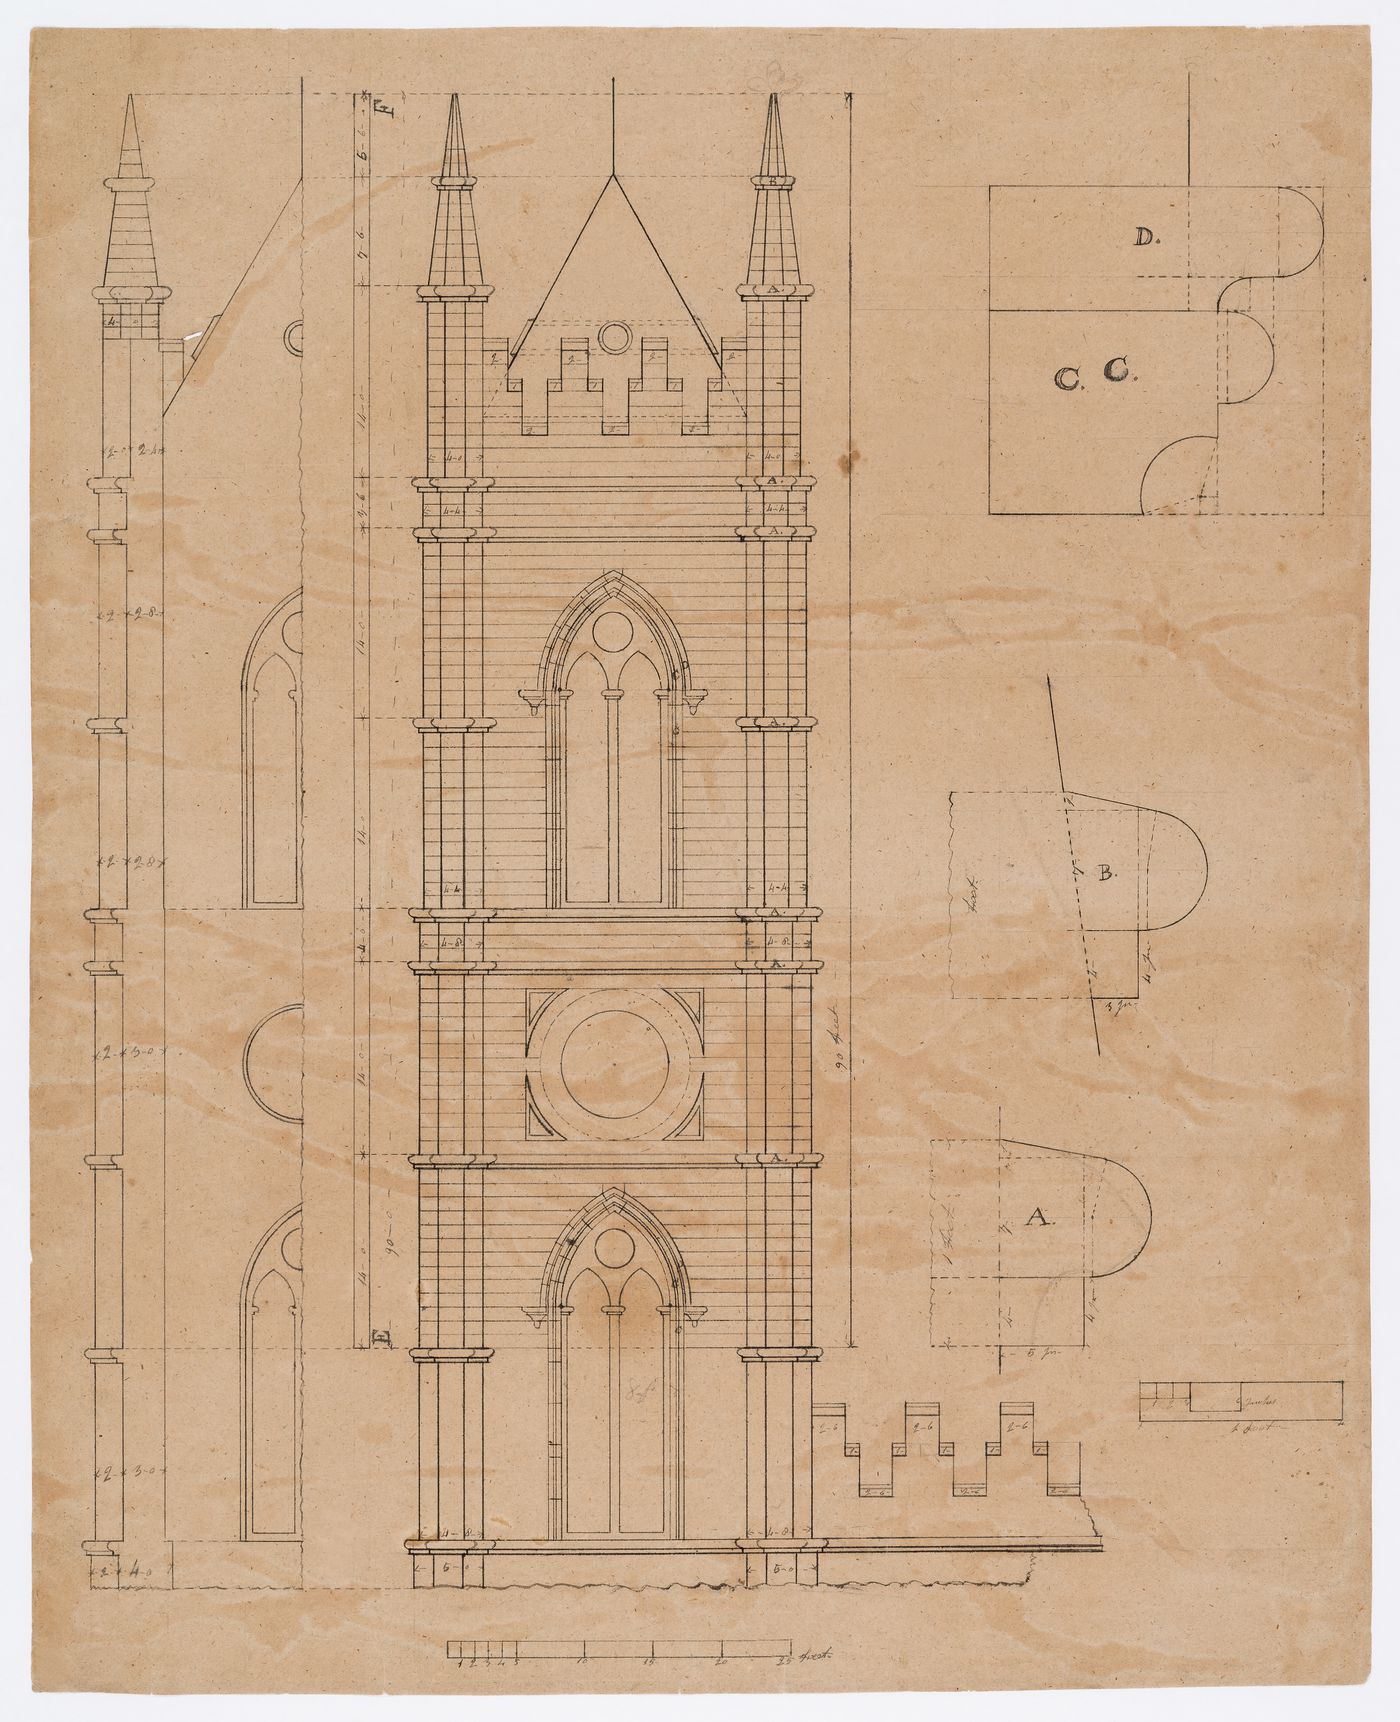 Elevations for a tower and sections for decorative masonry details for Notre-Dame de Montréal